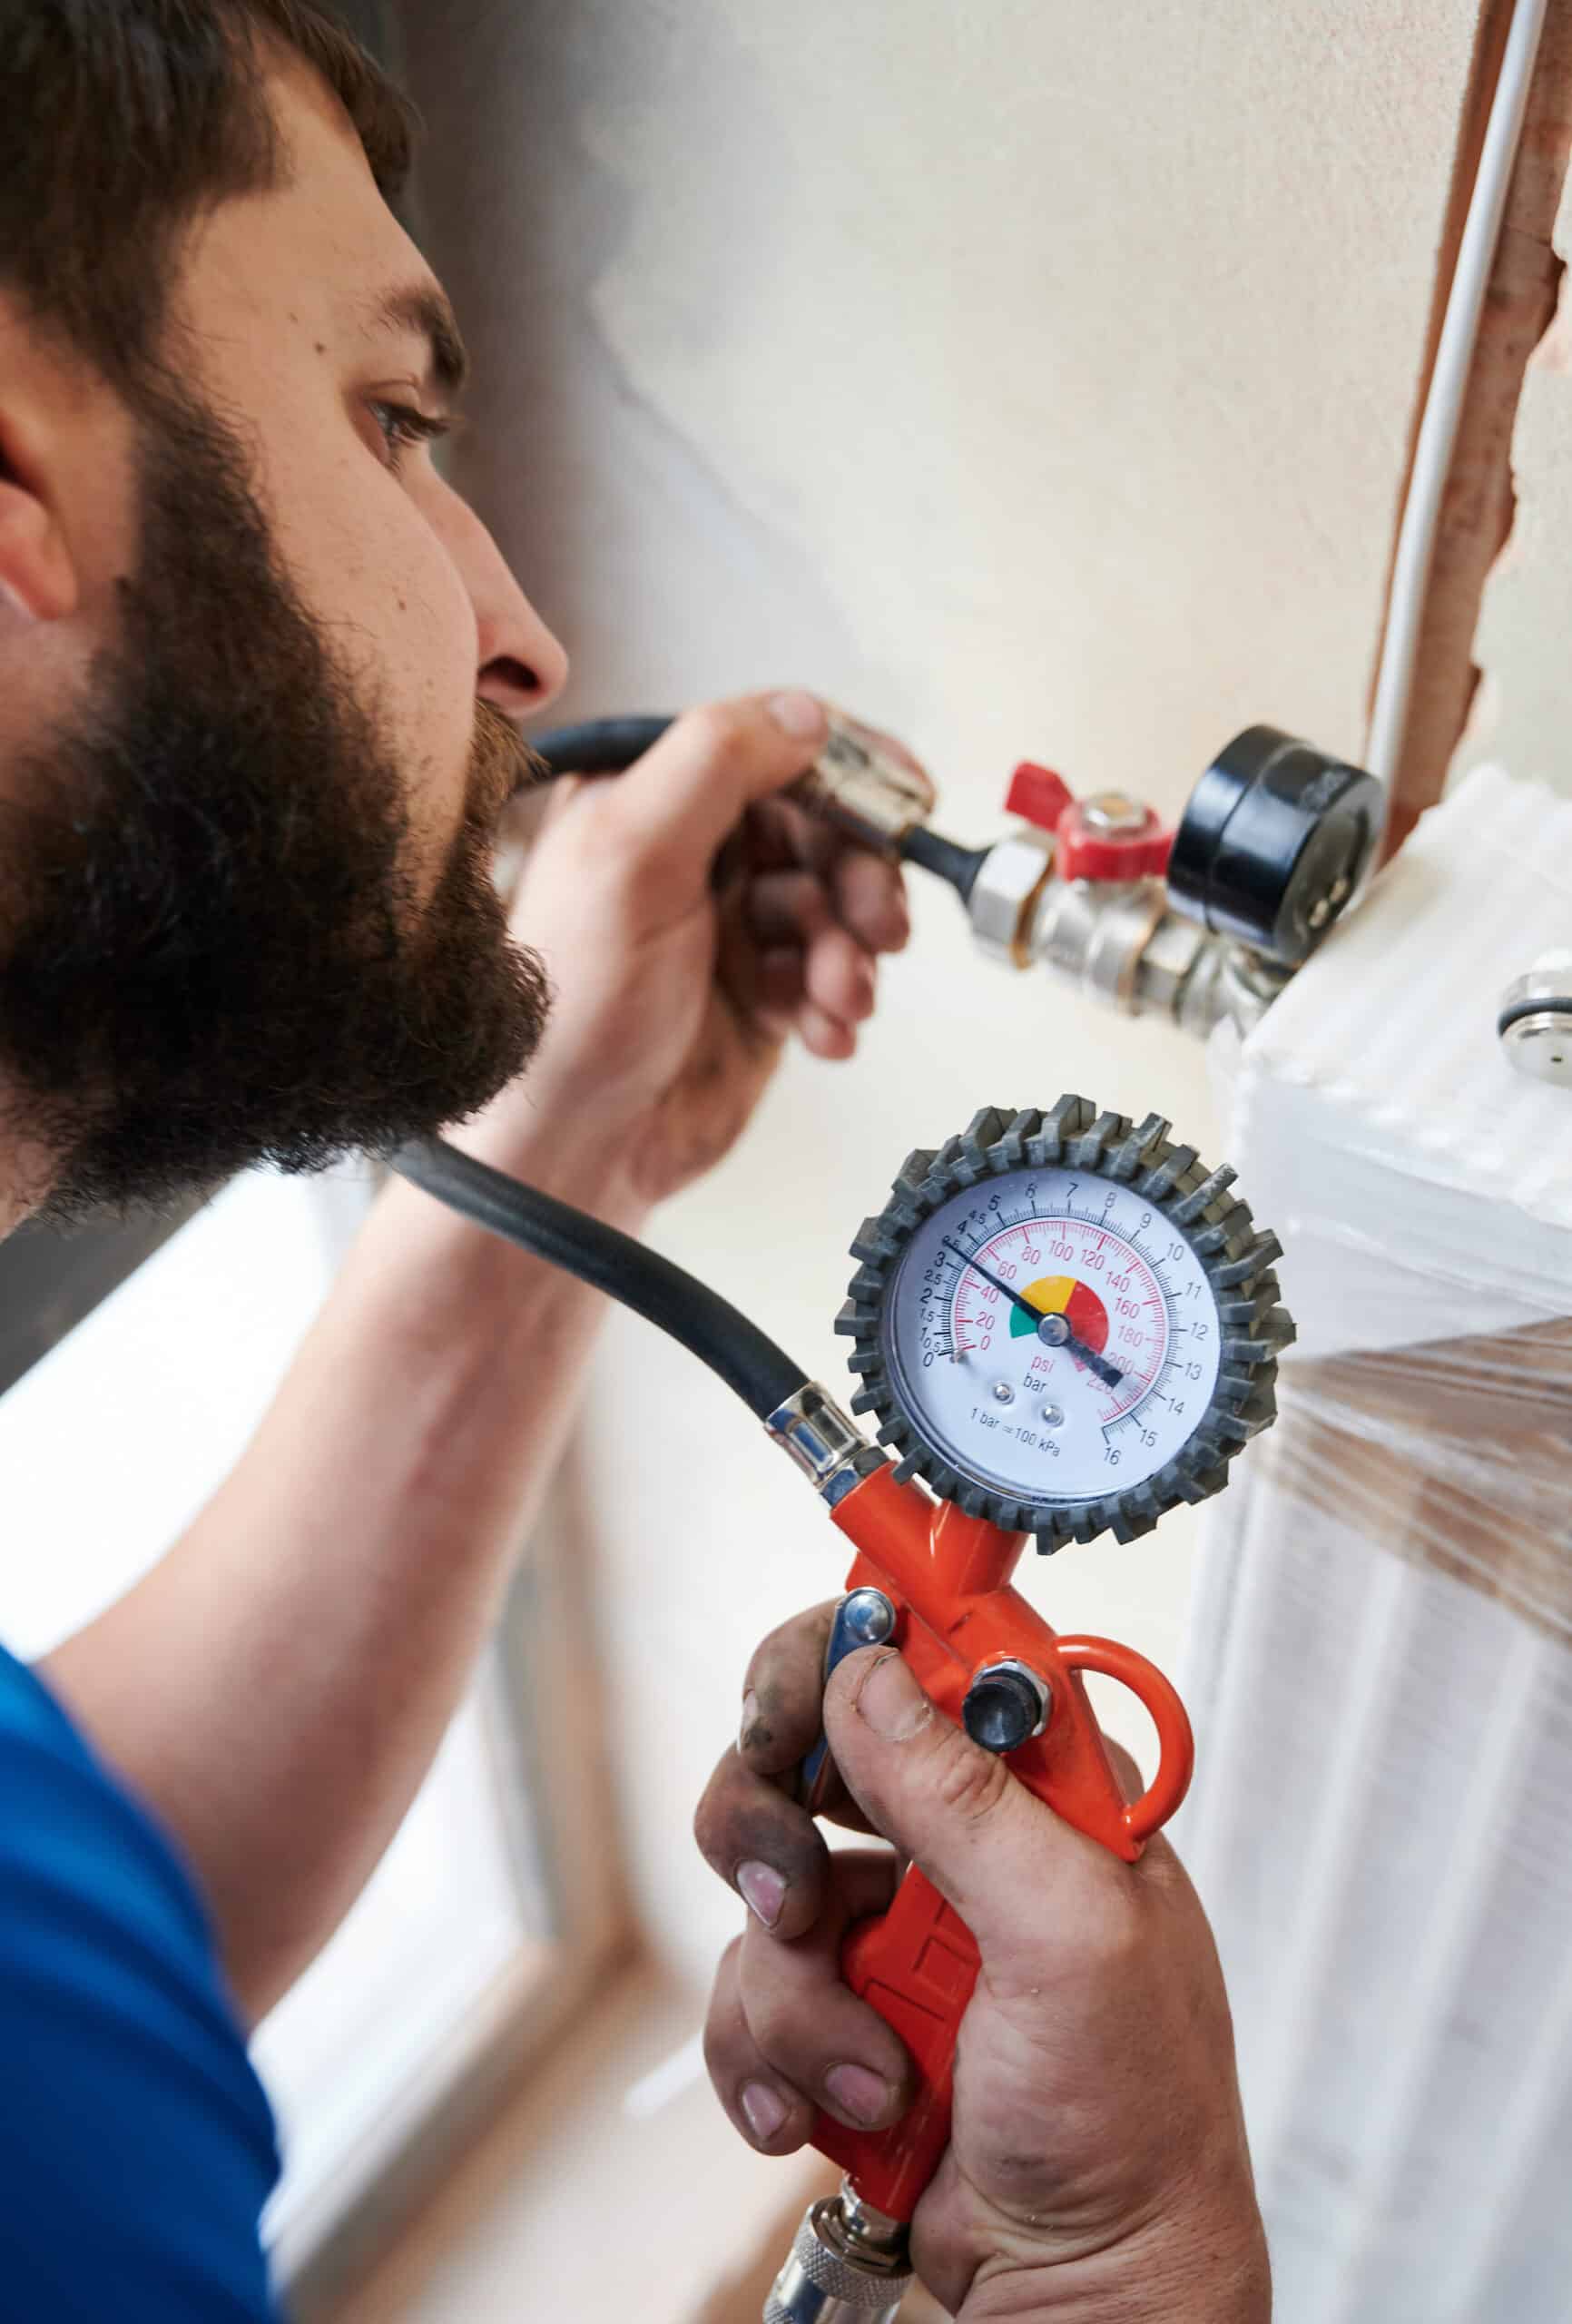 Close up of bearded man filling pipes with pressurized air to inspect for leaks in new installation. Worker using manometer, checking gas tightness of heating system. Concept of gas tightness testing.